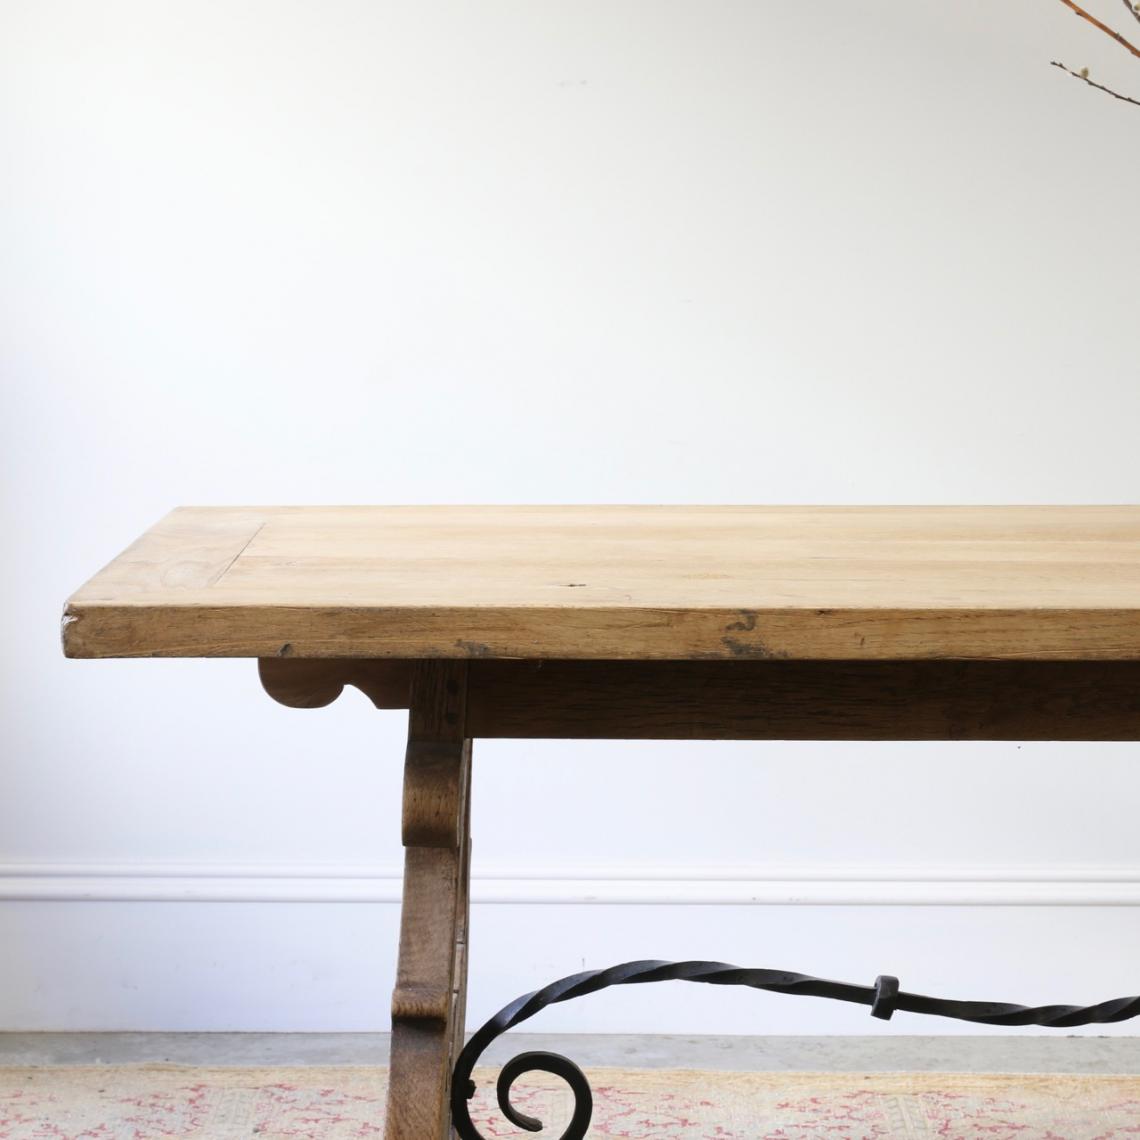 Spanish Dining Table 2 Metres